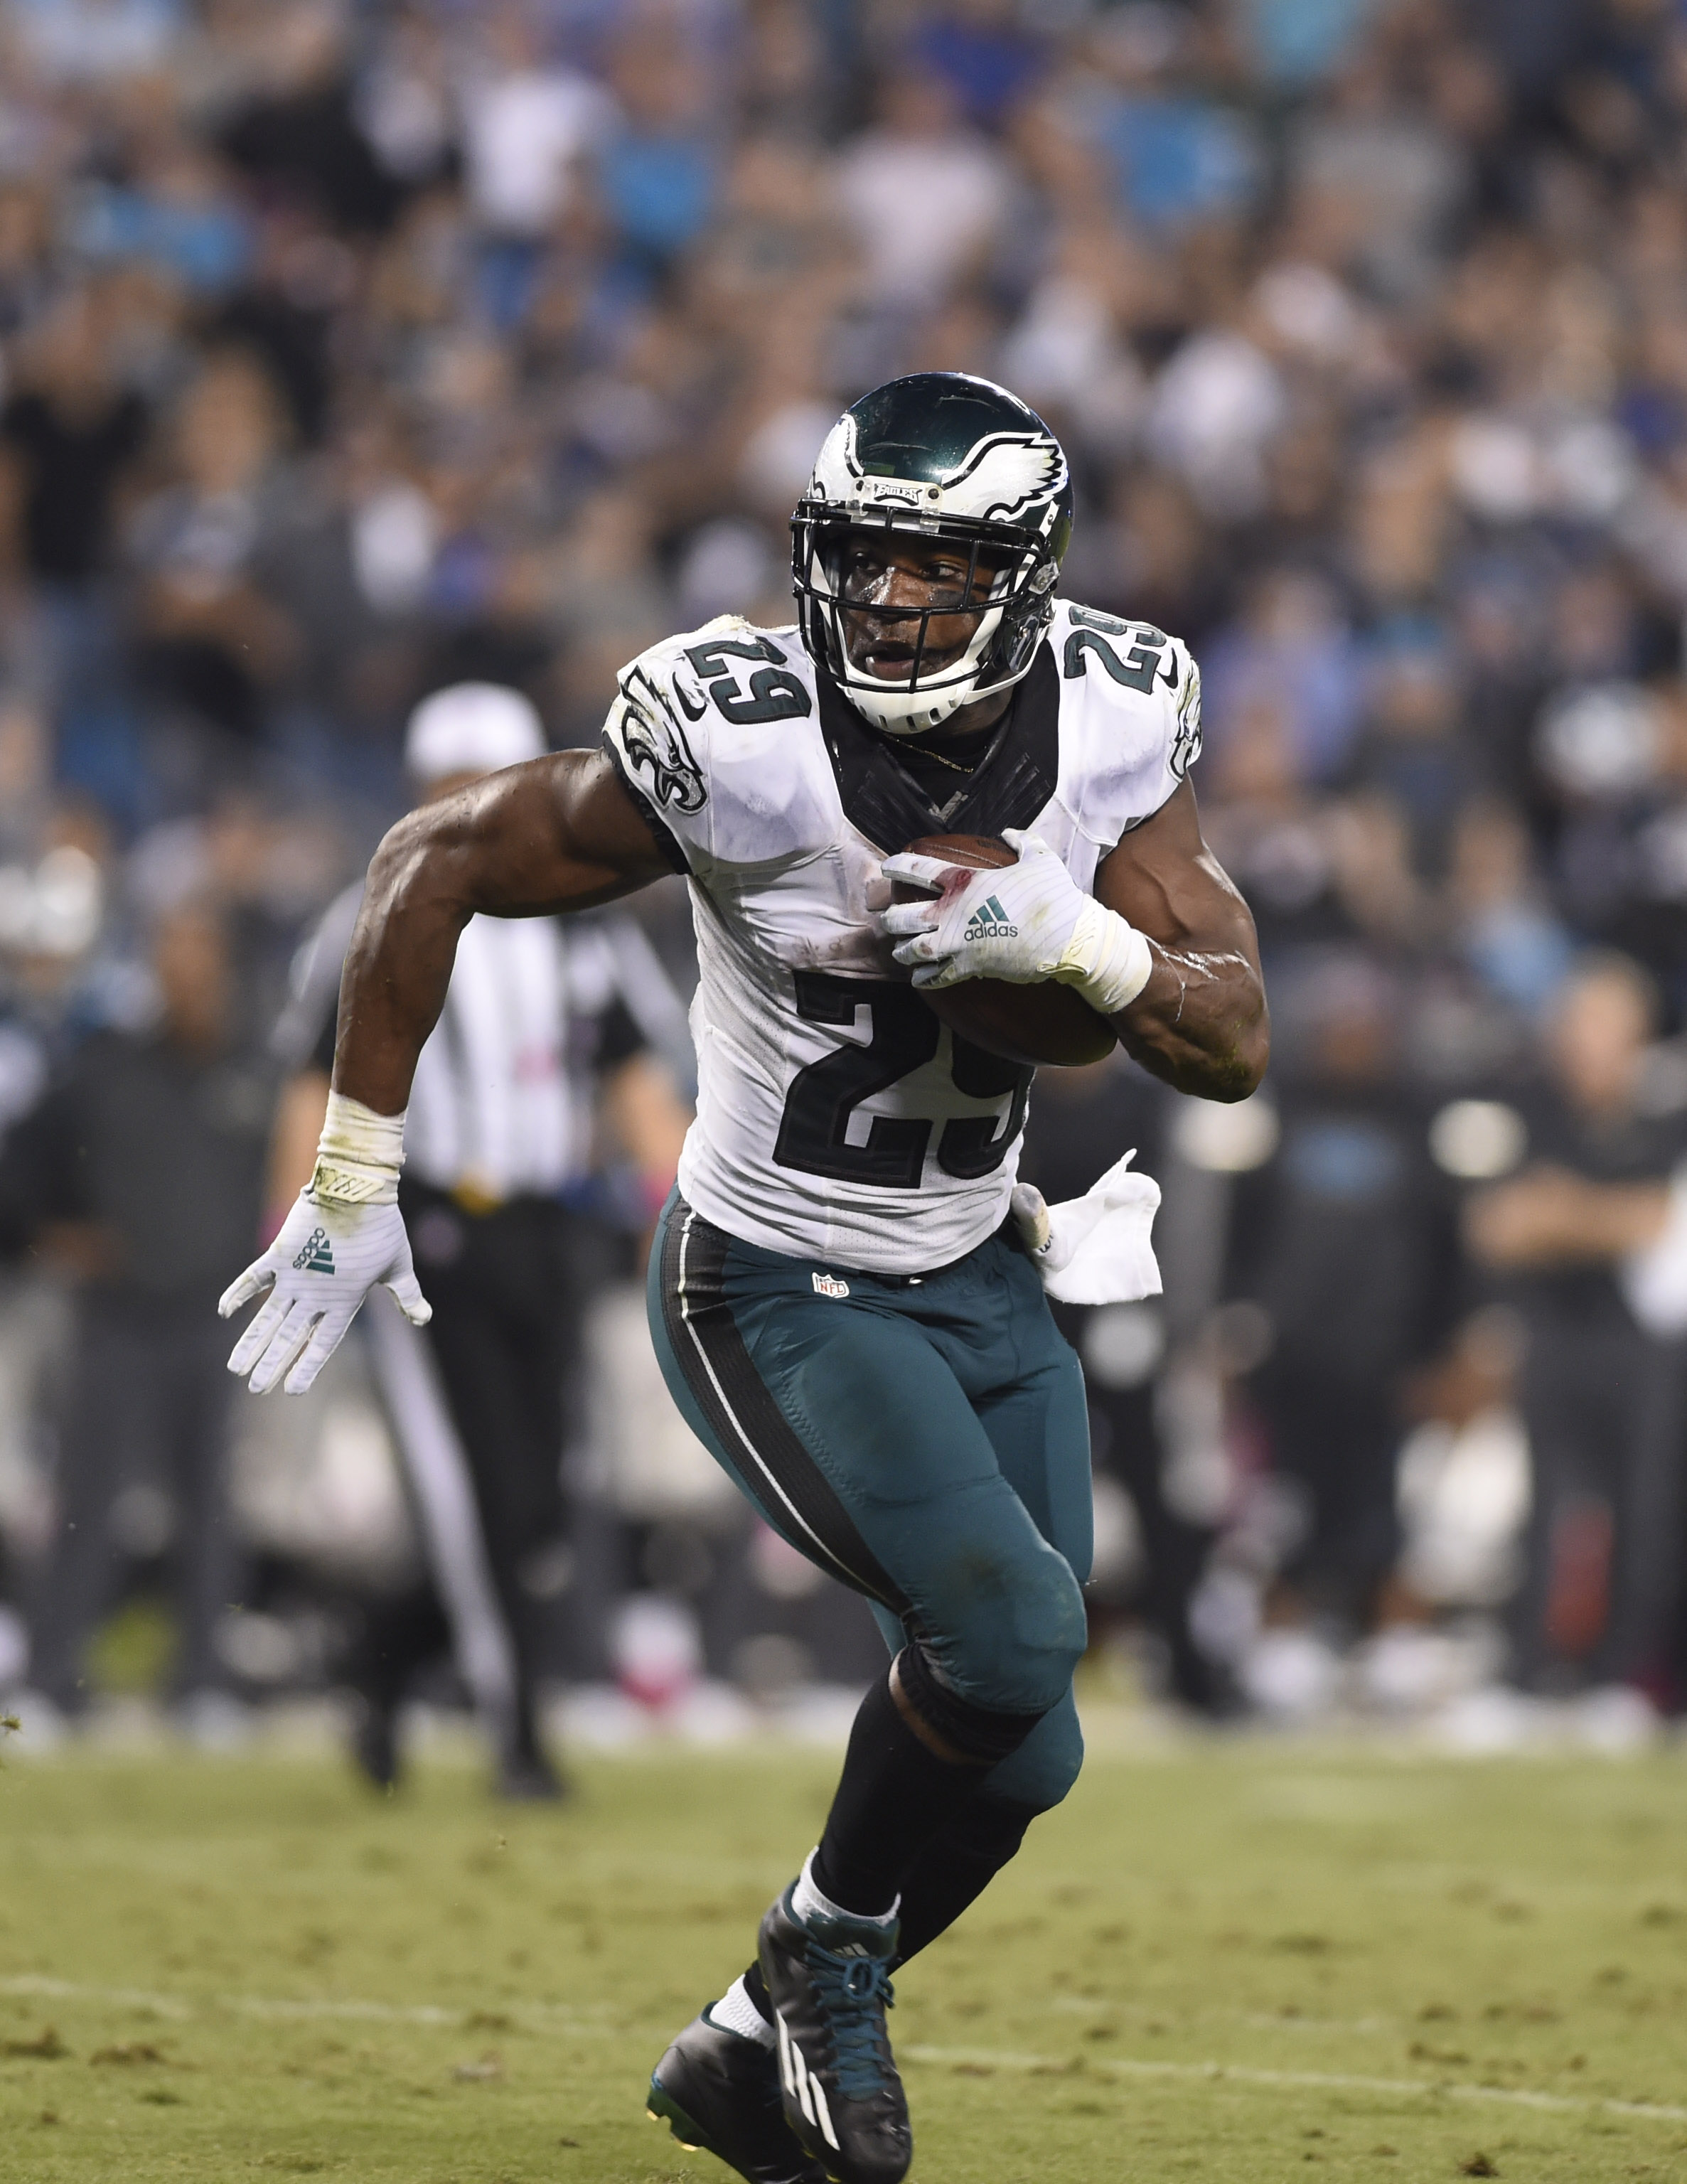 DeMarco Murray: 'I'm Committed' To Eagles